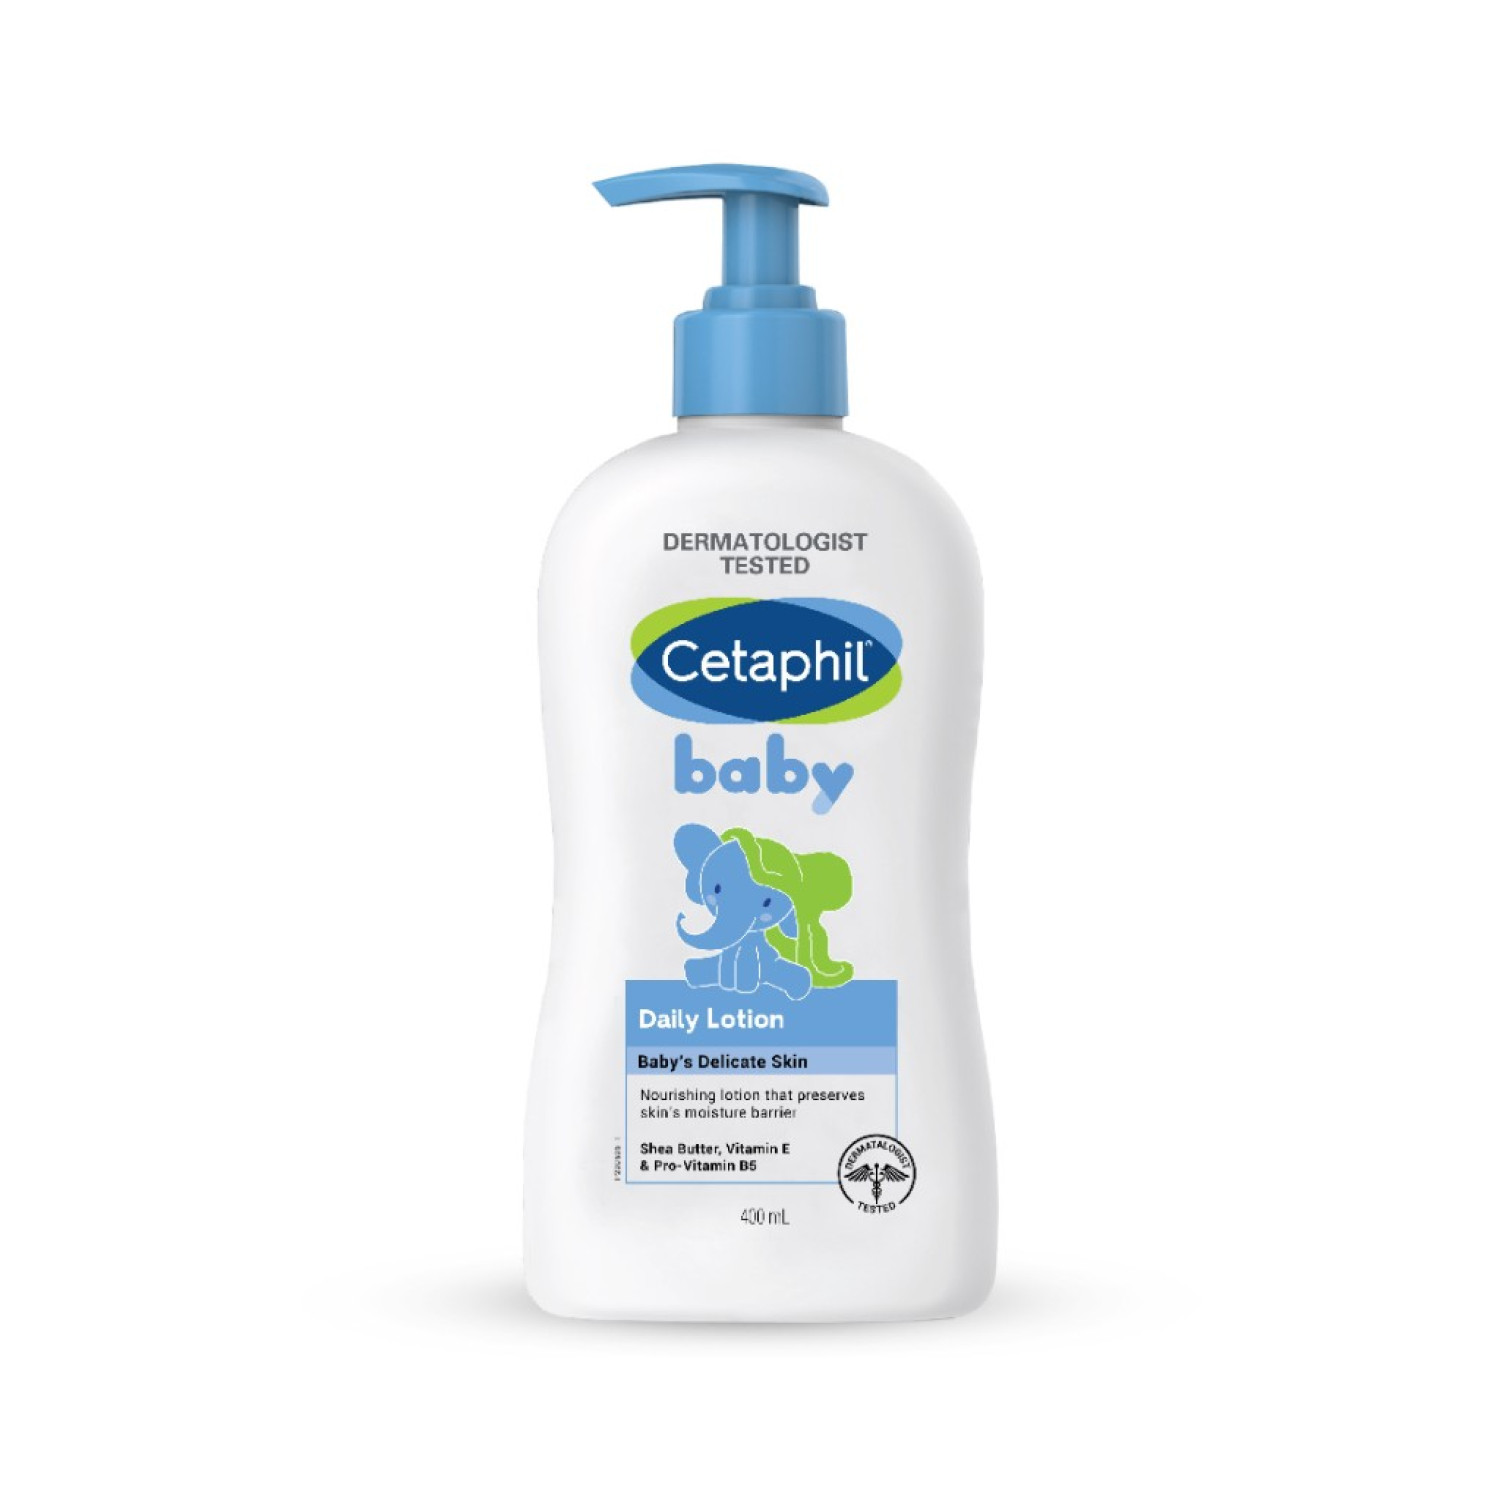 Cetaphil Cetaphil Baby Daily Lotion